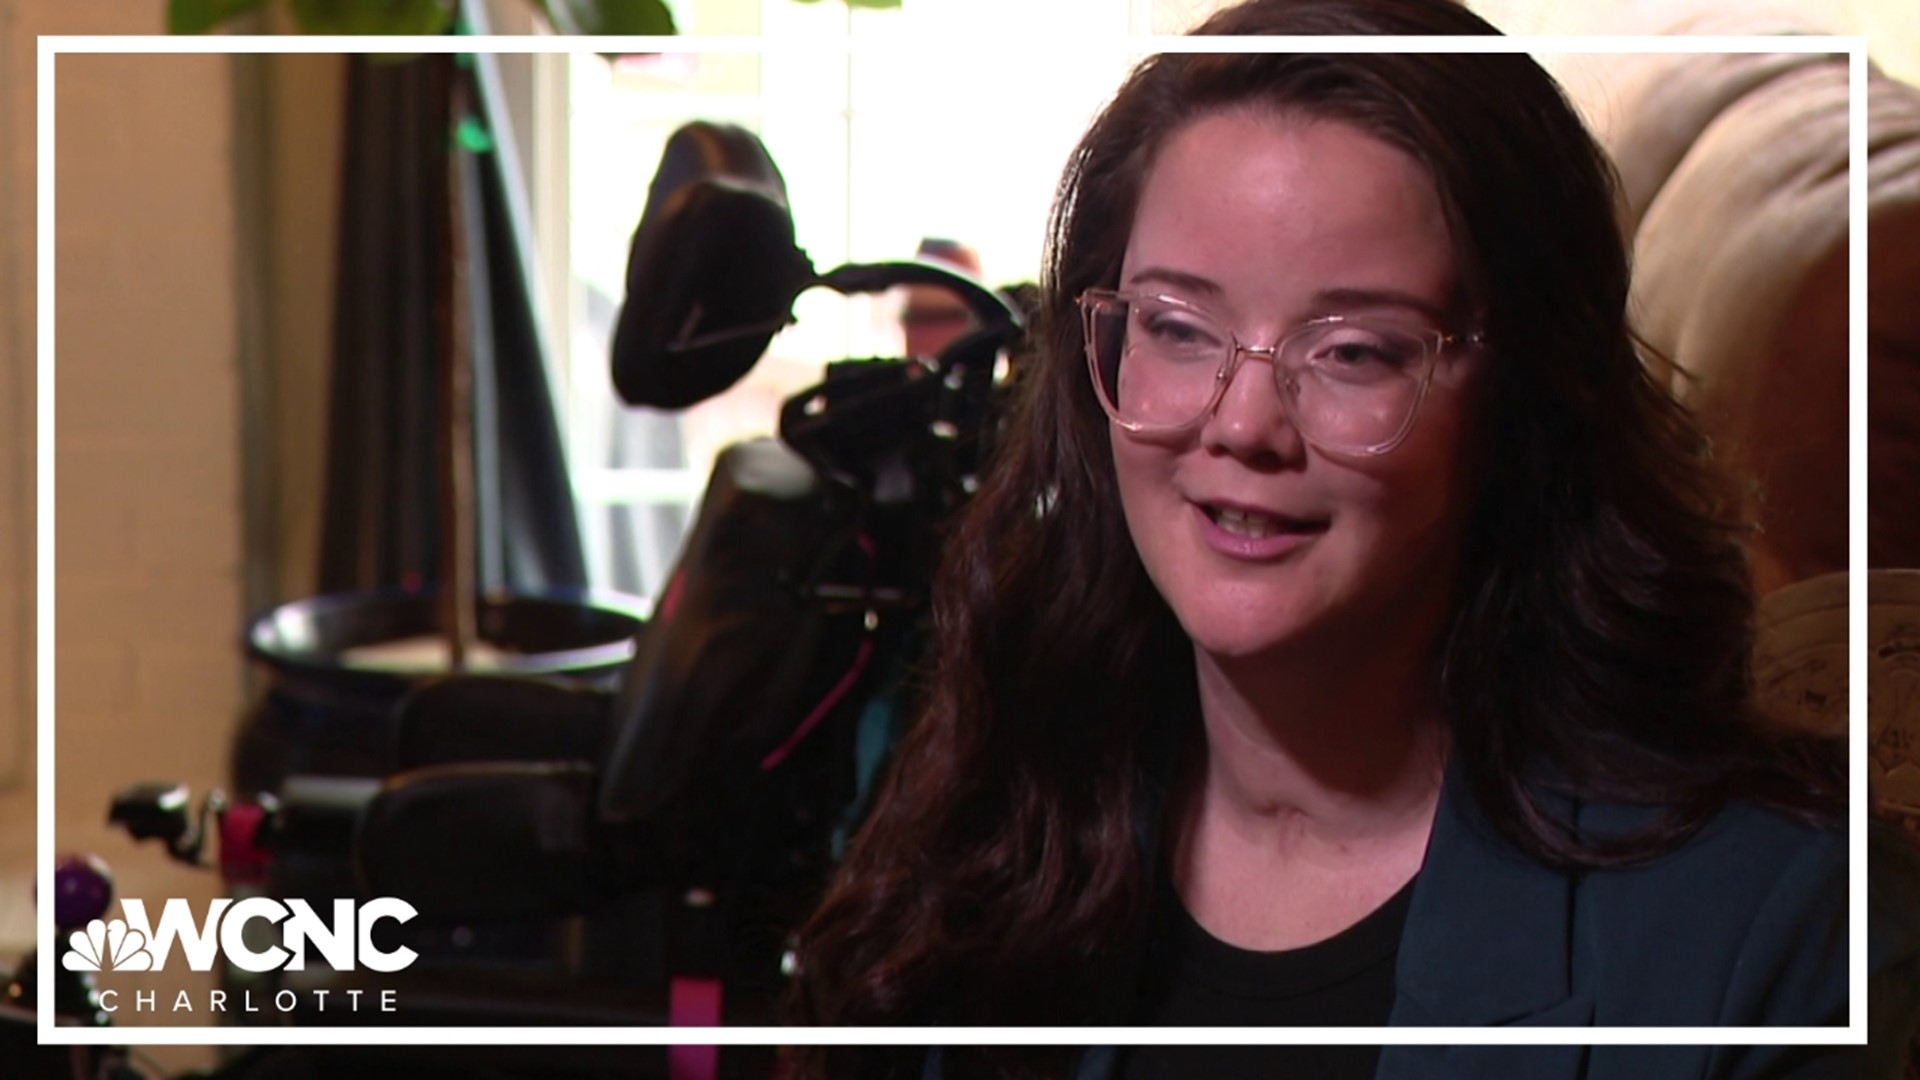 Elliot Parker's $60,000 motorized wheelchair was heavily damaged on a flight back from California. Now her mom is advocating for better air travel for the disabled.